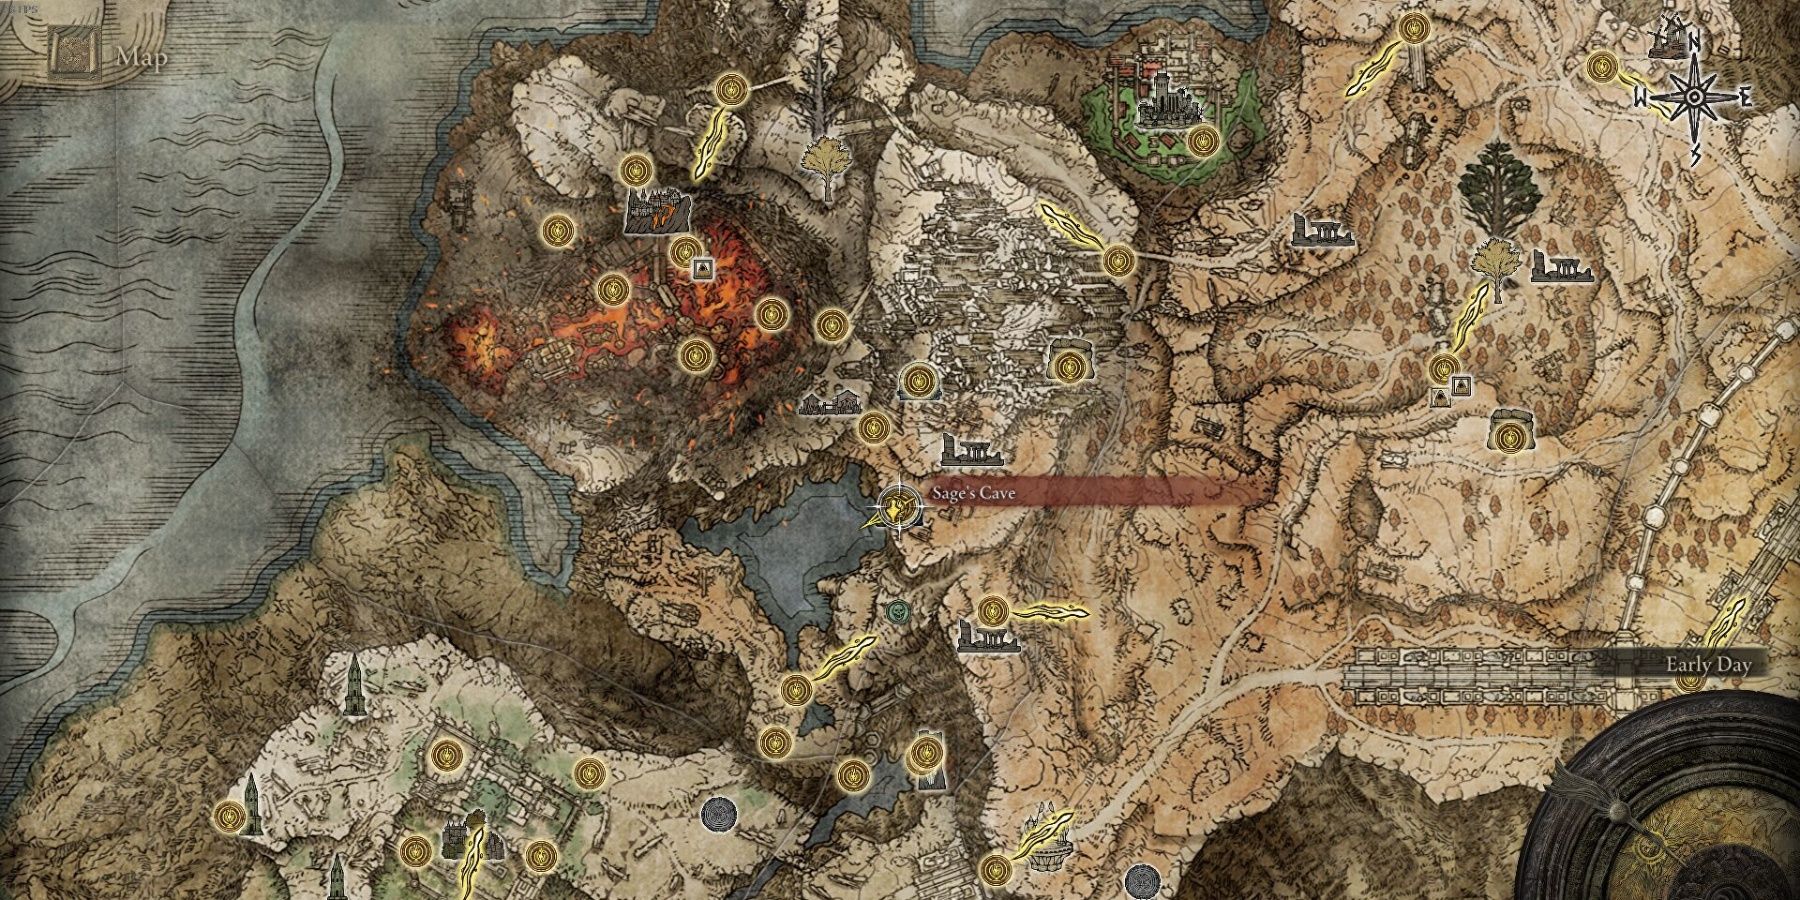 The Sage's Cave map in Elden Ring